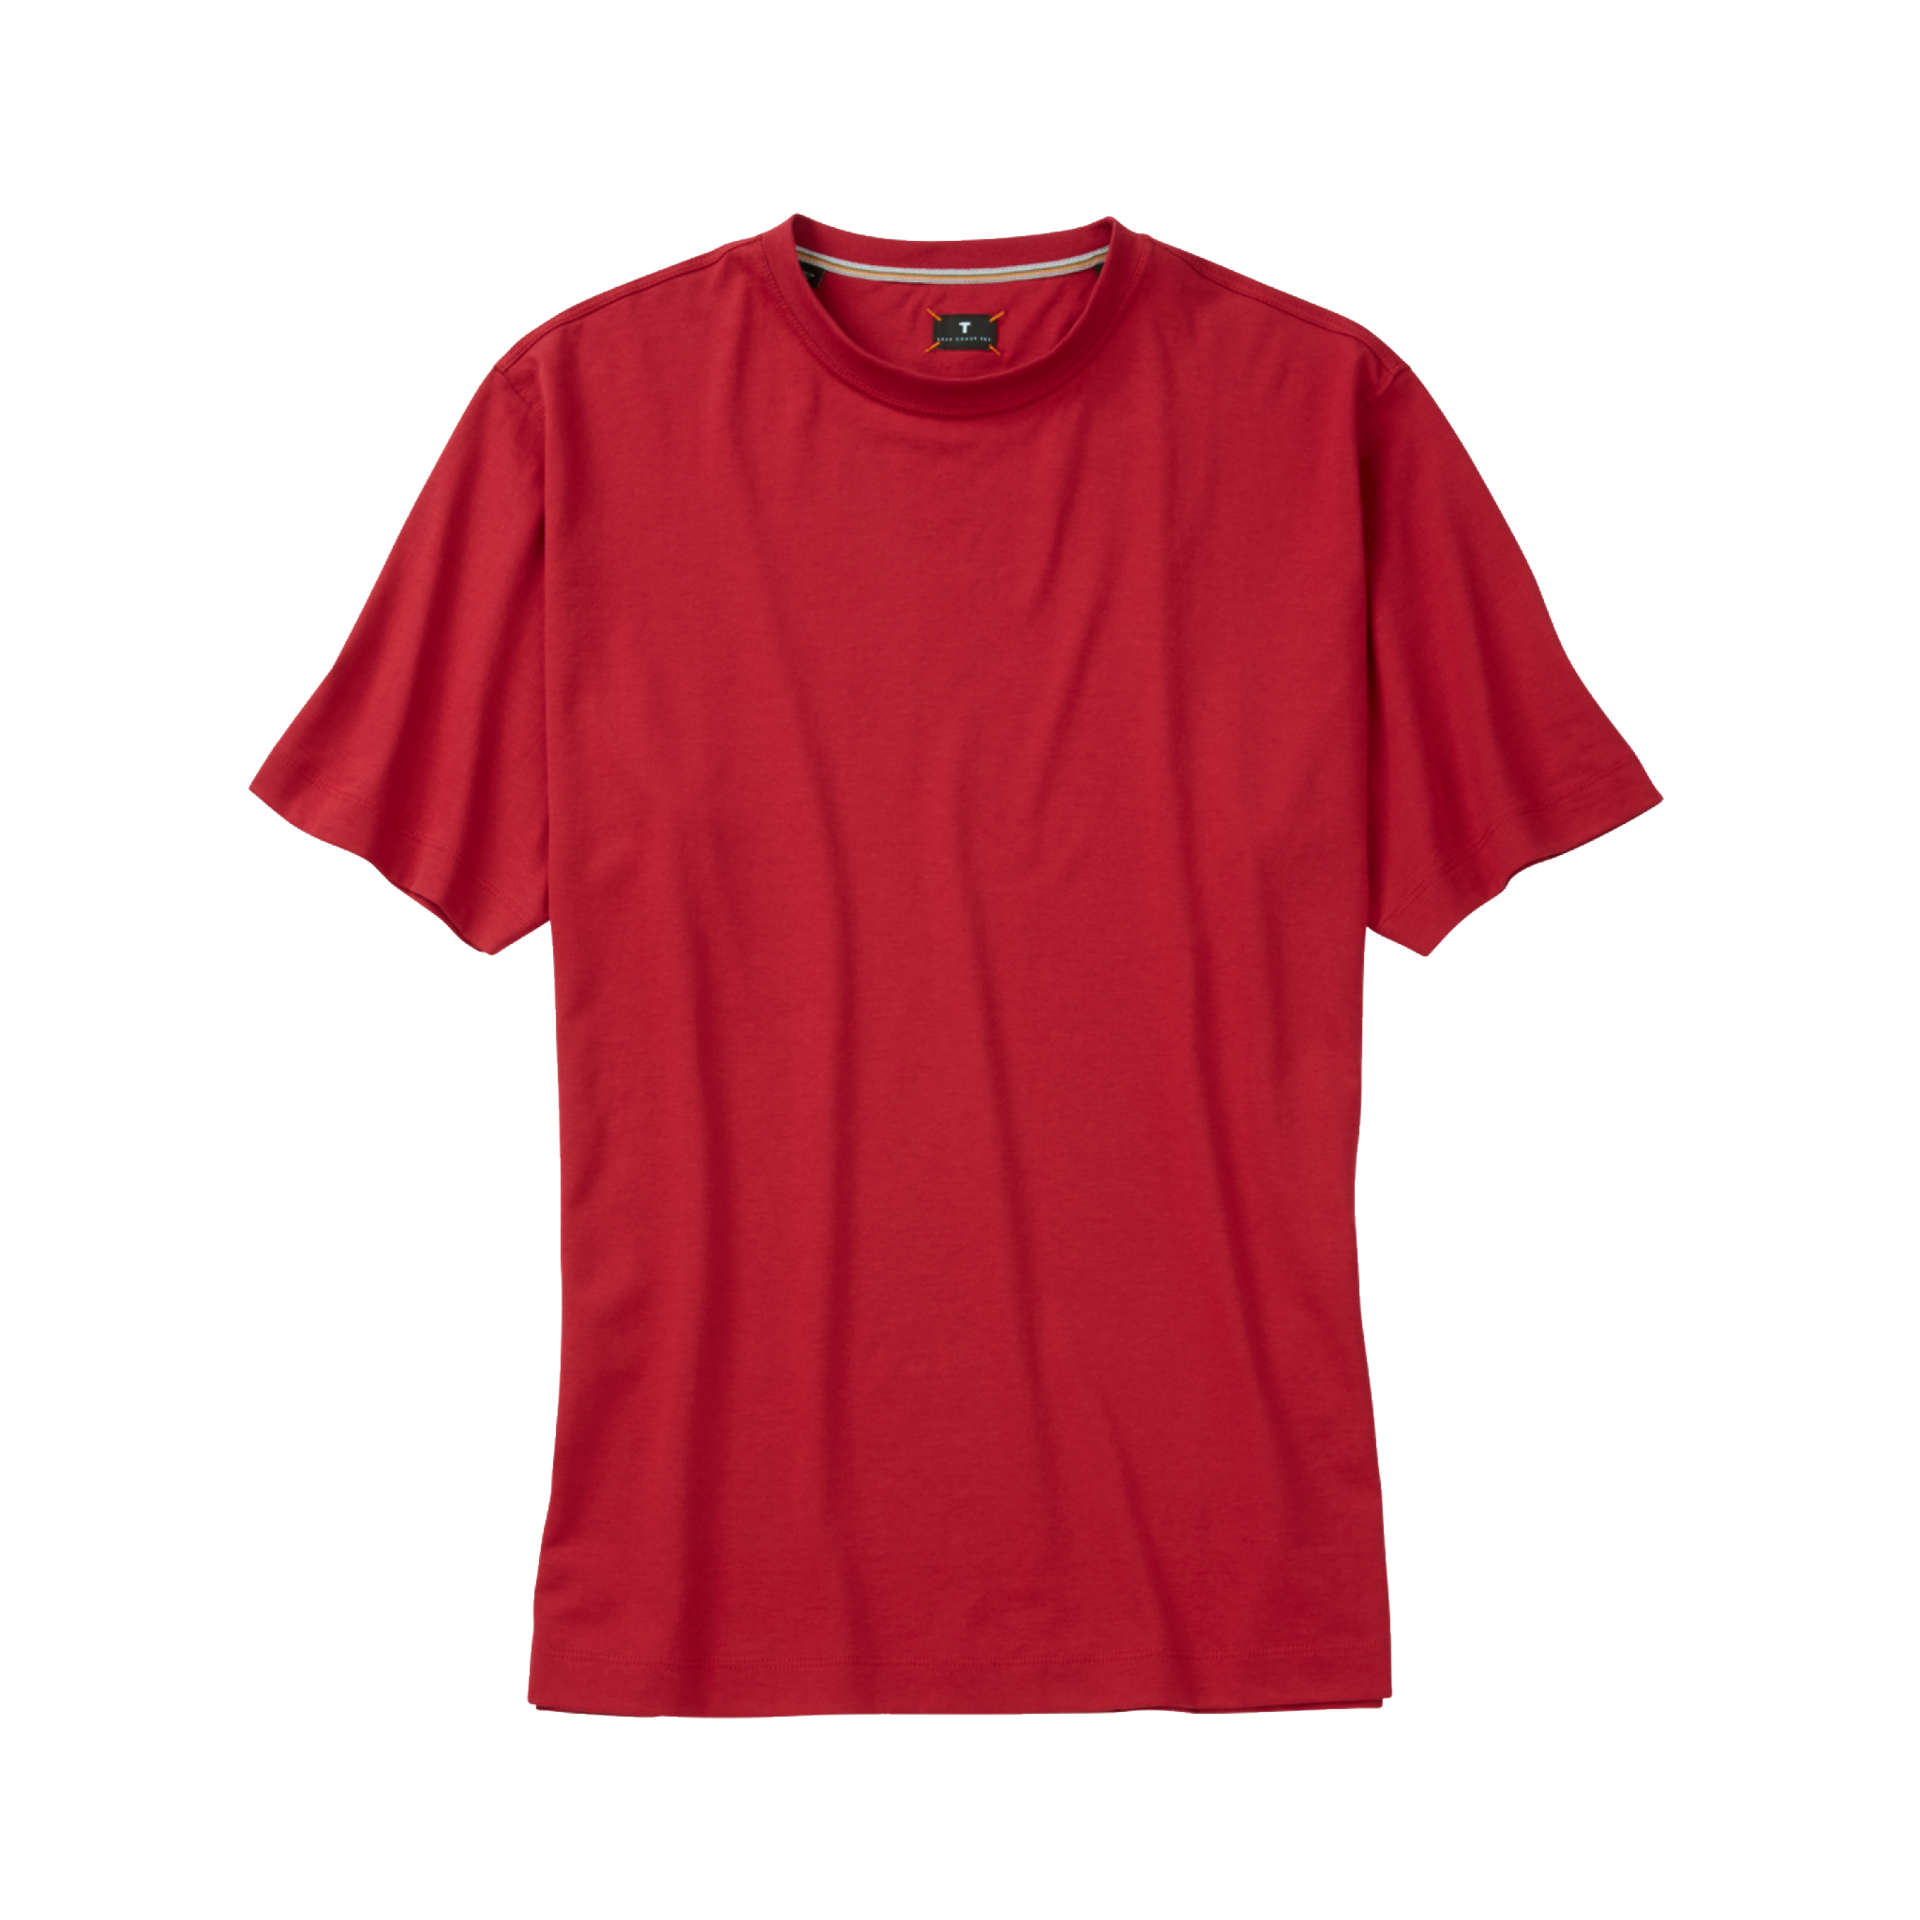 Crew Neck Peruvian Cotton Tee Shirt in Red by Left Coast Tee